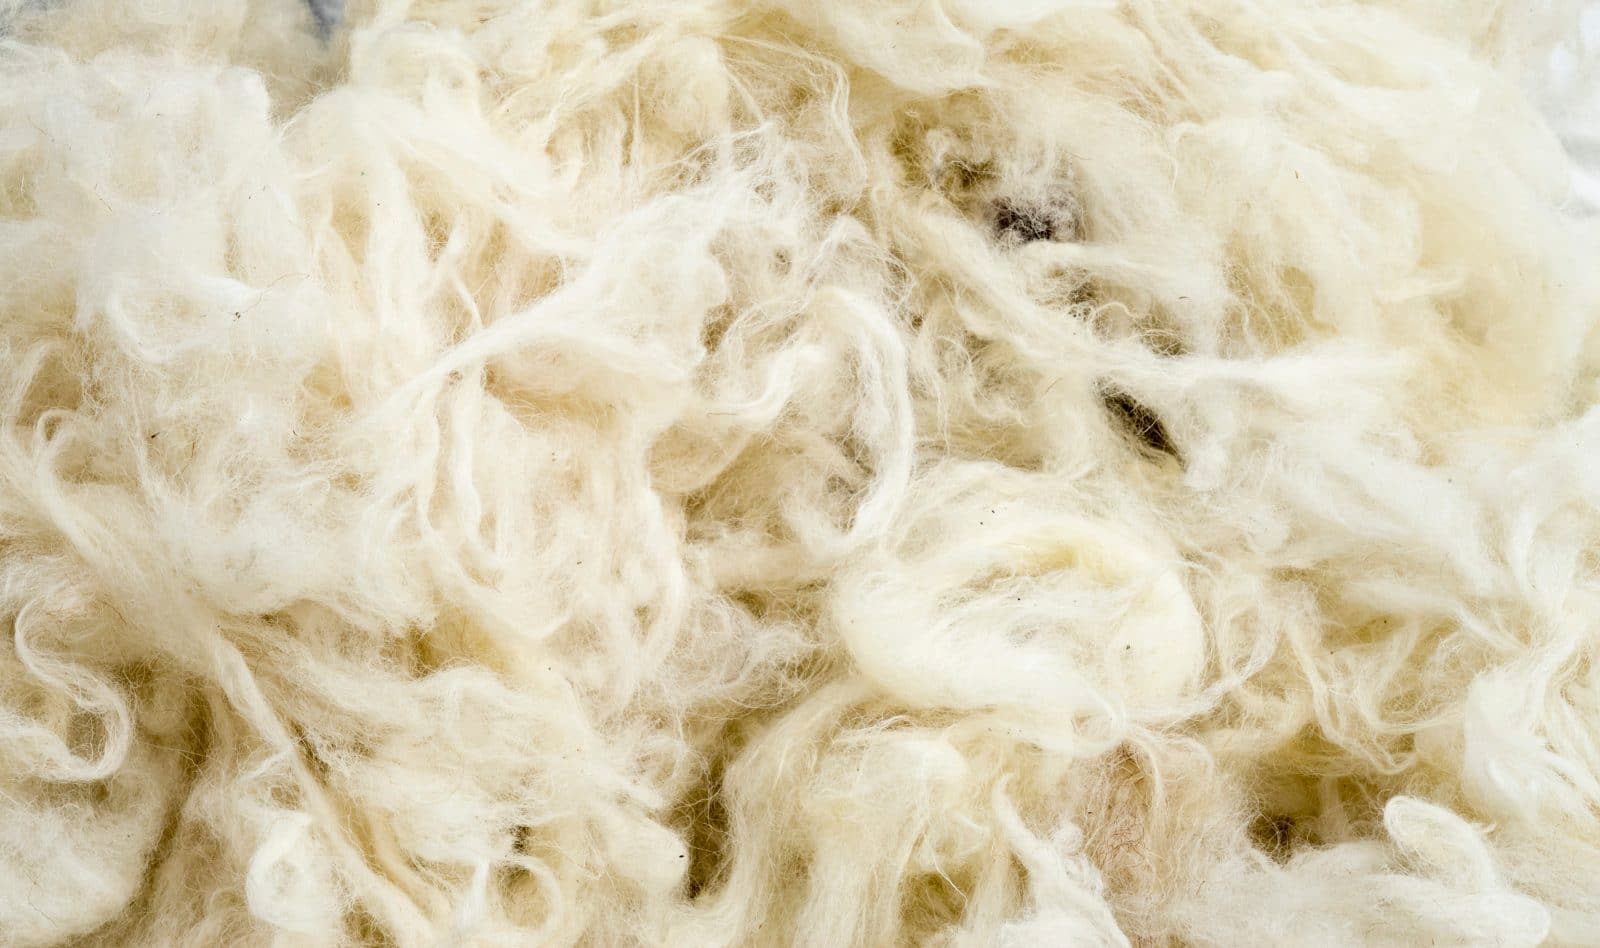 A closeup shot of wool. The dense fibers of wool make wool carpets and rugs a good solution for absorbing sound waves.